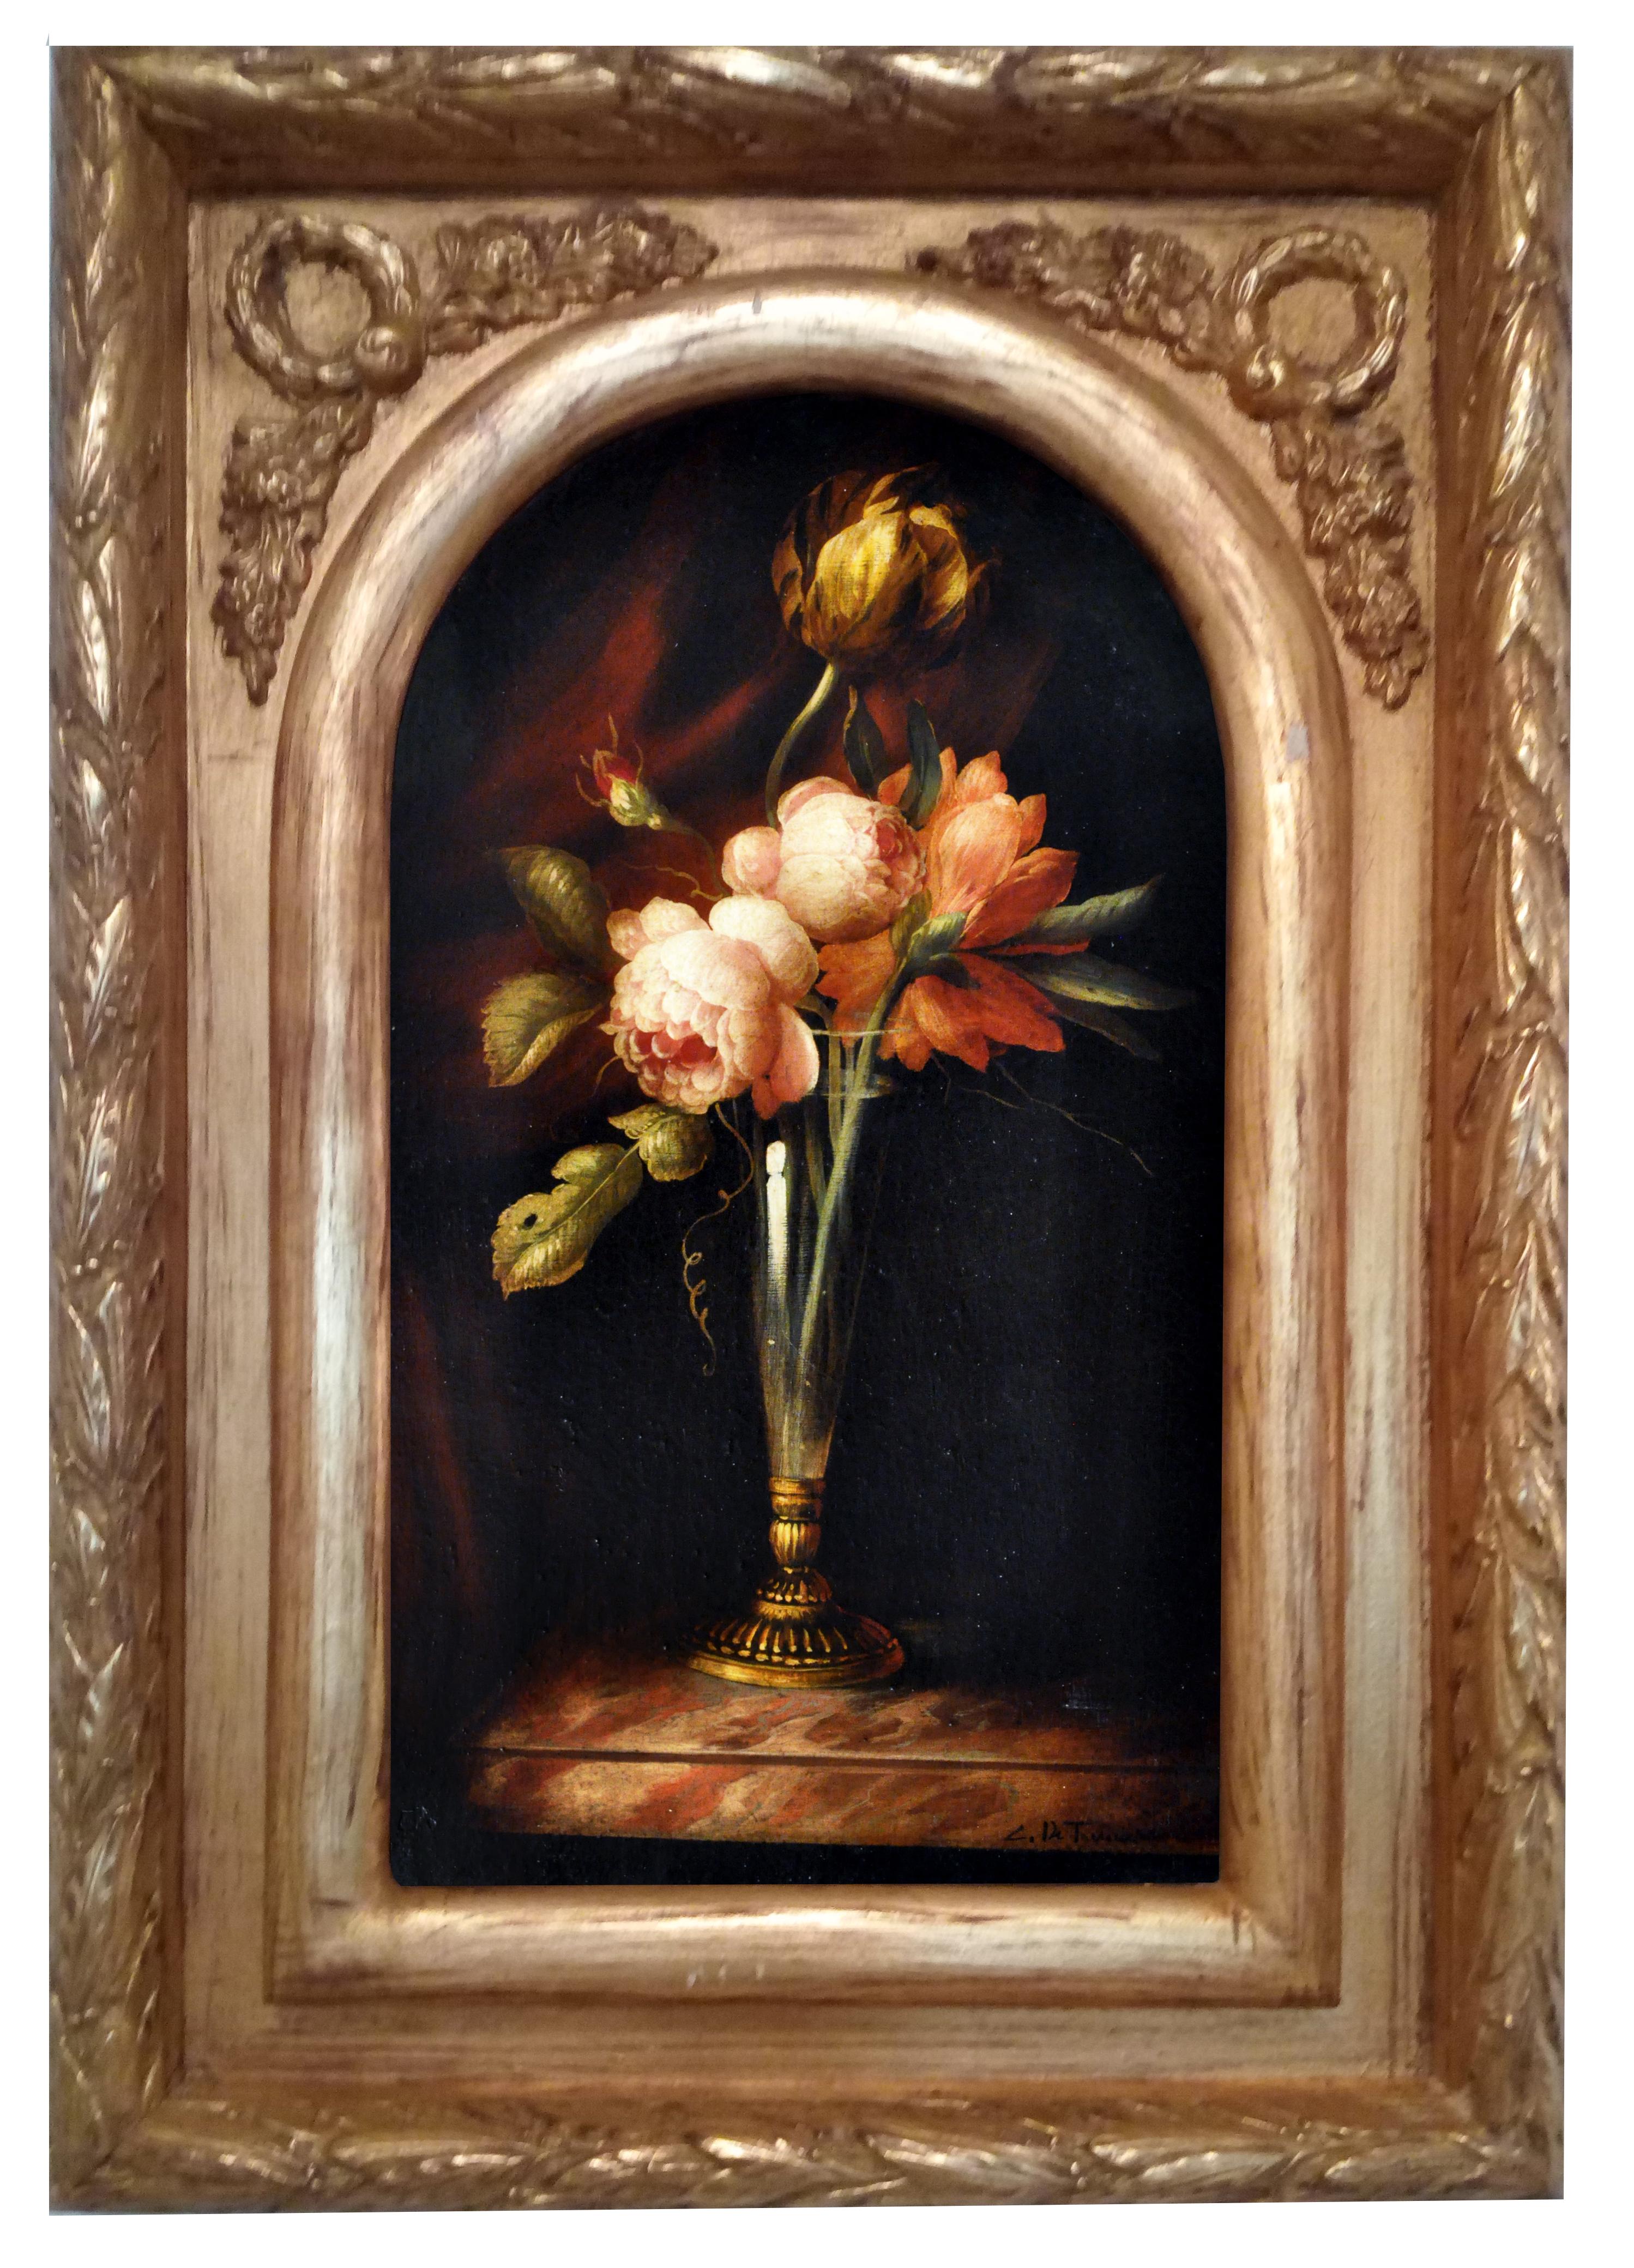 Flowers - Carlo De Tommasi Italia 2009 - Oil on canvas cm. 45x25
Gold gilded wooden frame cm.65x44.
In this precious oil painting, Carlo De Tommasi is inspired by the Dutch compositions of Dutchman Jan Van Os.
 The mastery of De Tommasi allows him